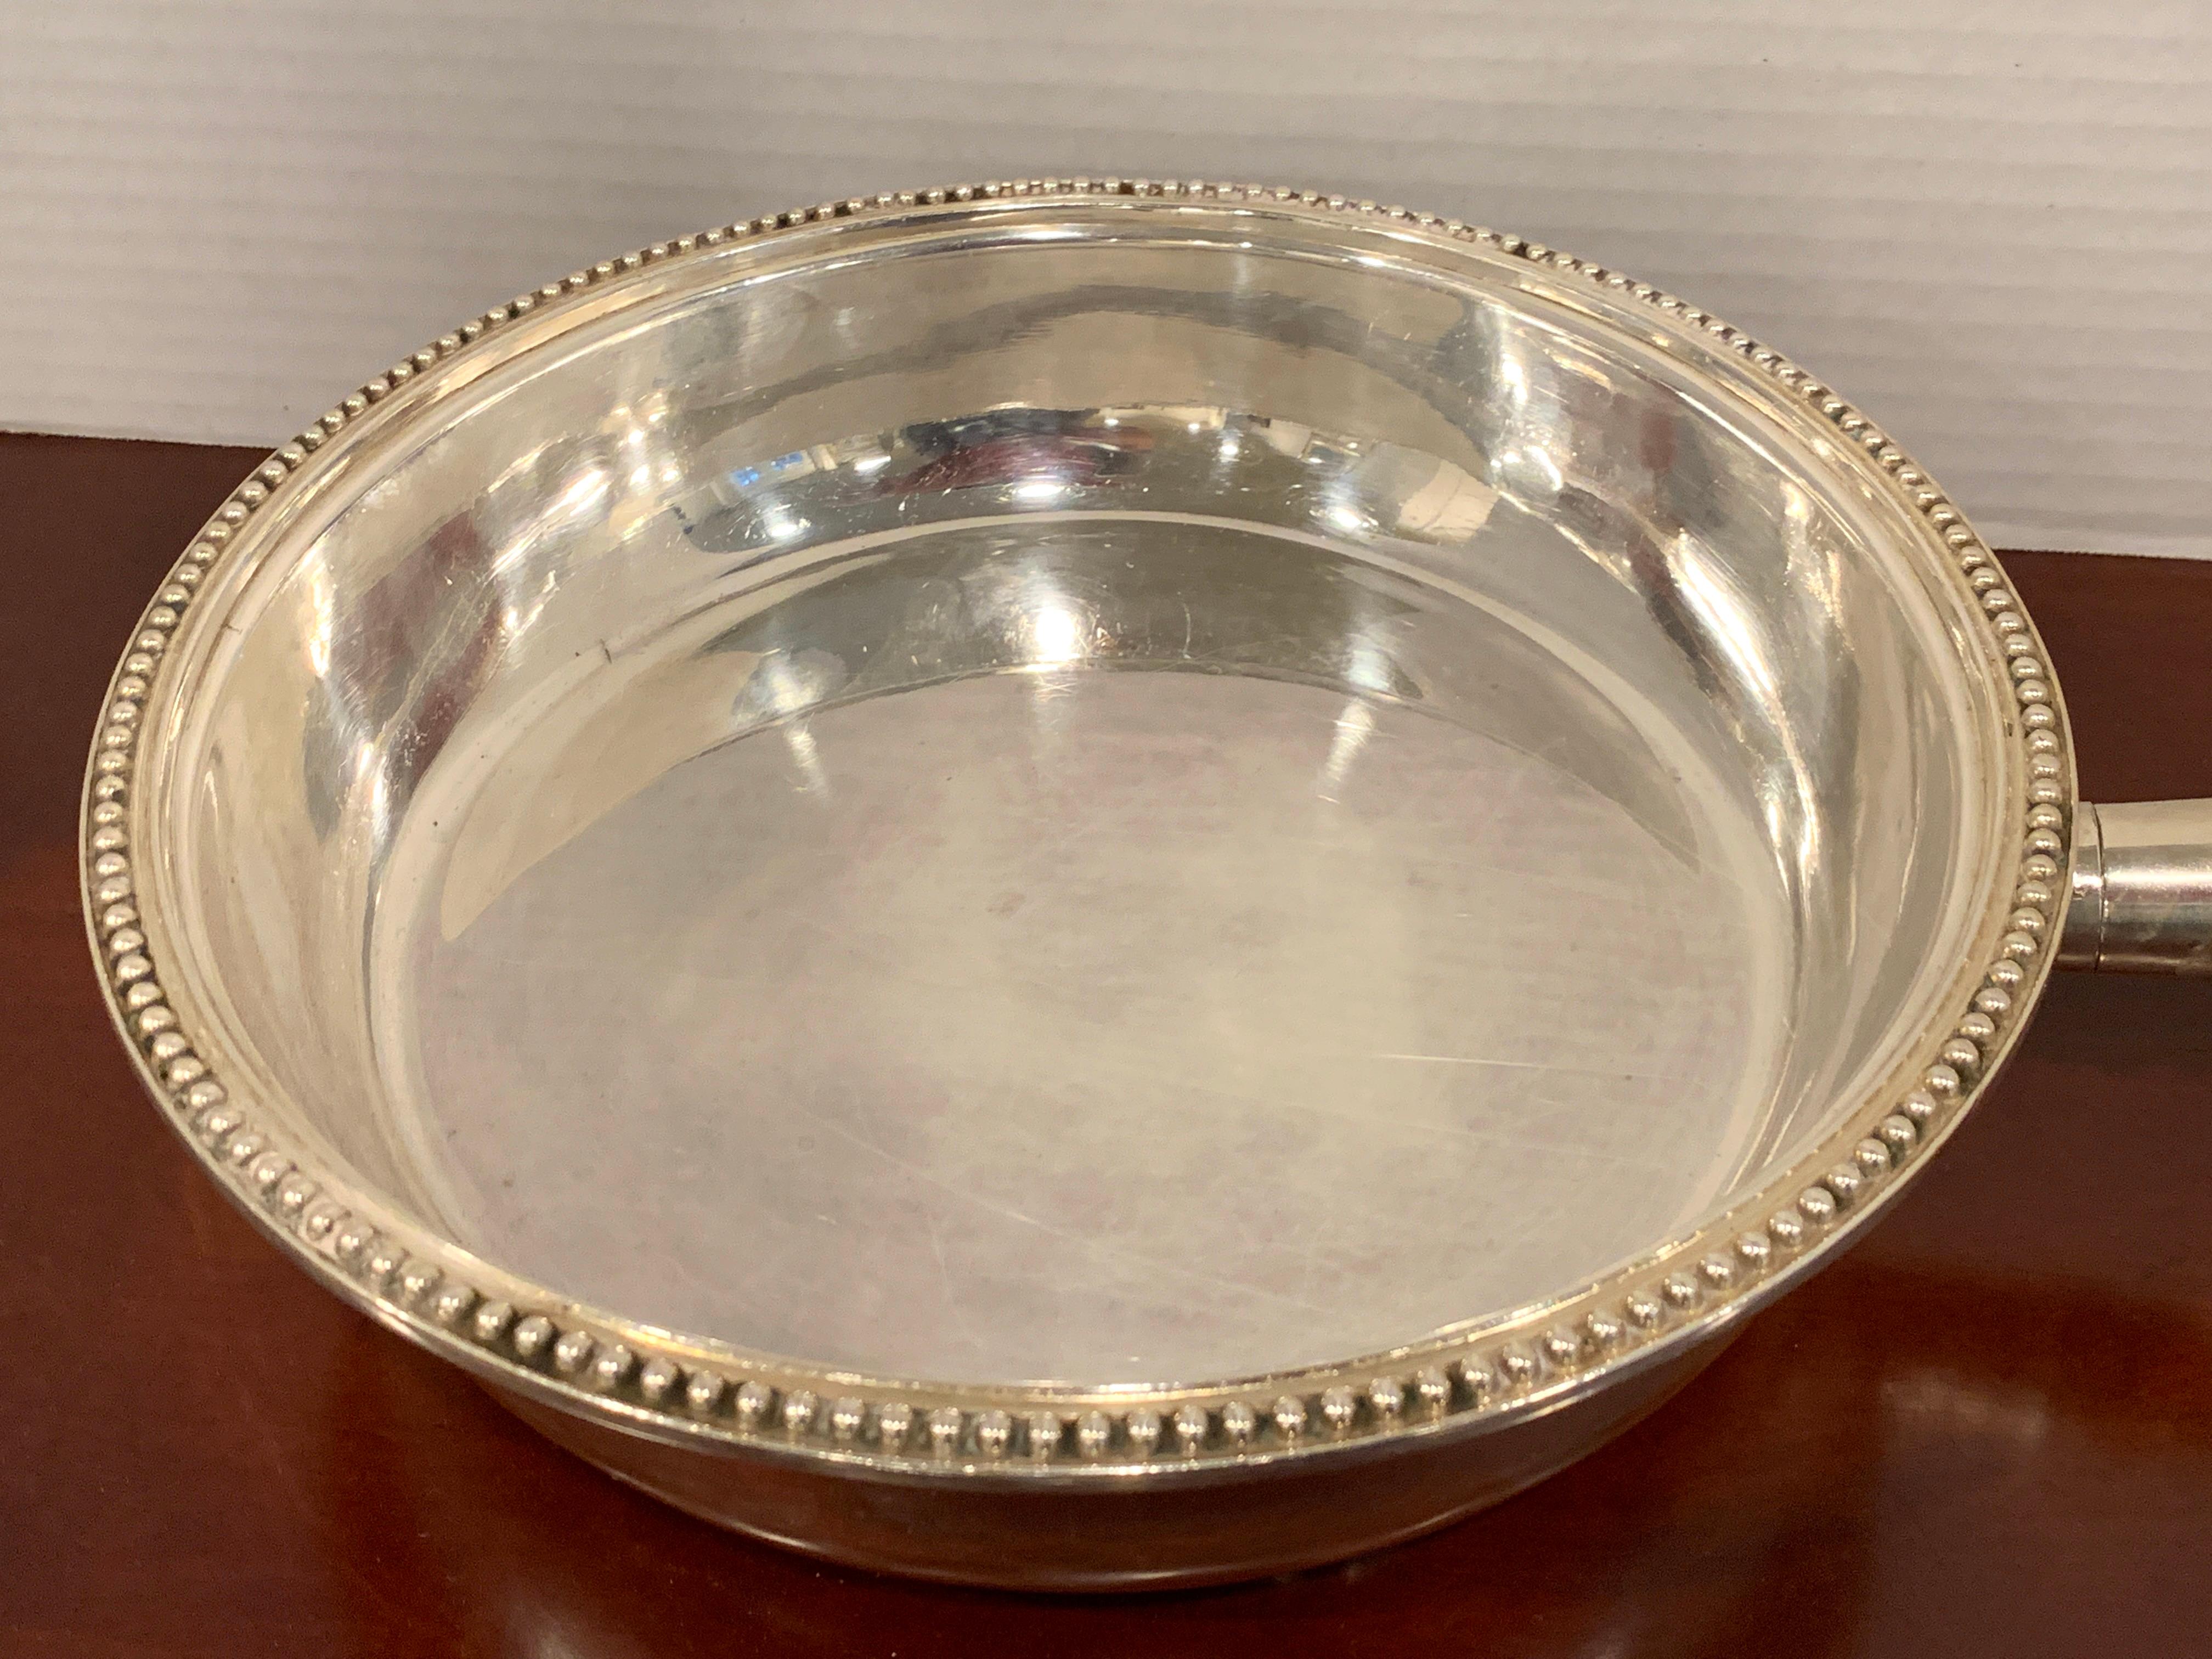 Antique English Silver Plated Warming Supper Dish by Henry Wilkinson & Co. For Sale 4